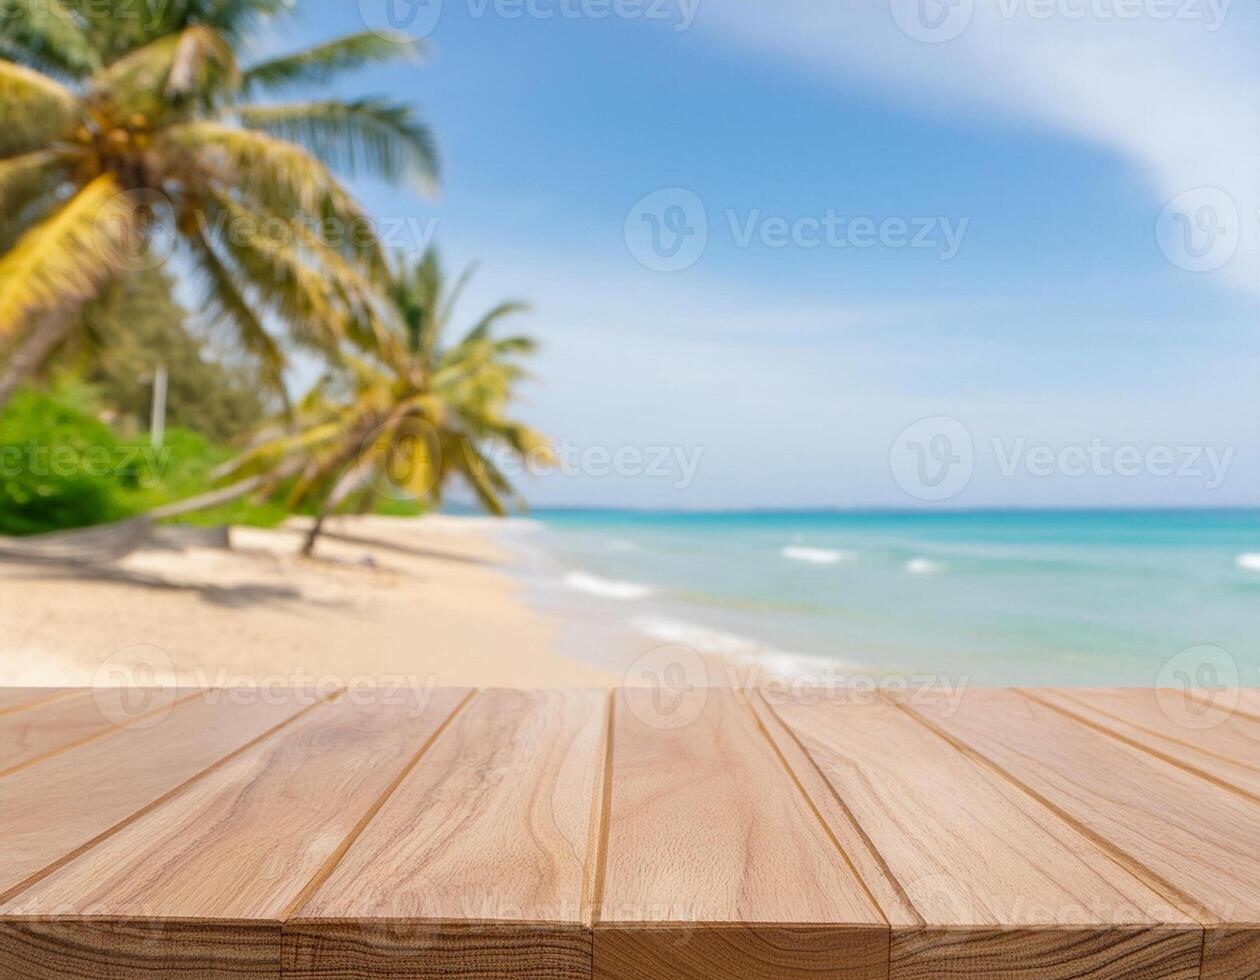 Beach Product Mockup Concept. Wooden Table with Tropical Beach Background photo